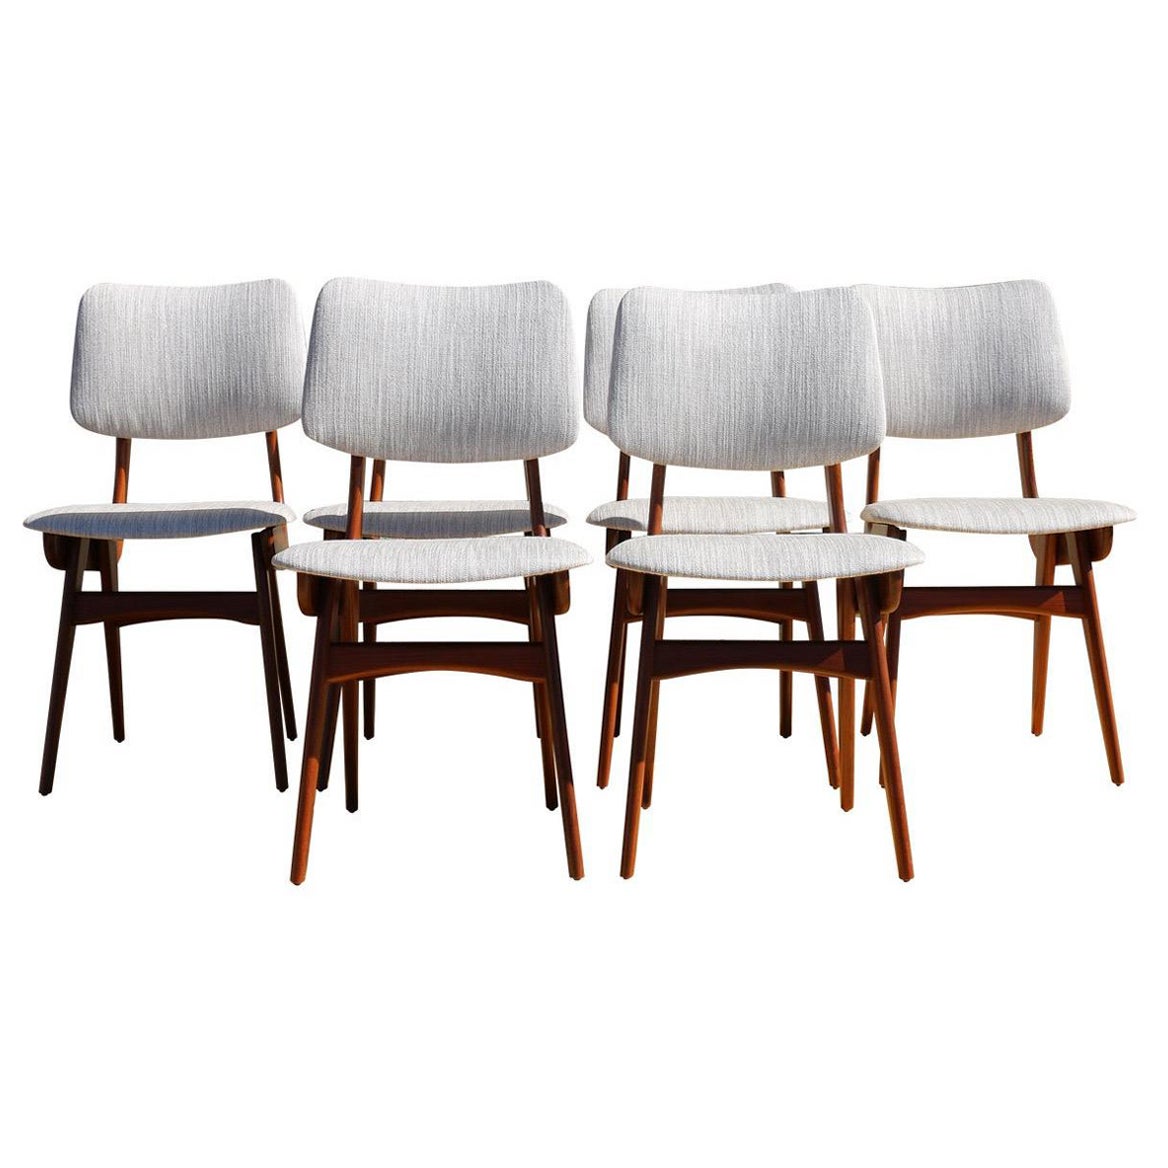 Set of Six Mid Century Modern Dining Chairs by Louis Van Teeffelen for Wébé For Sale